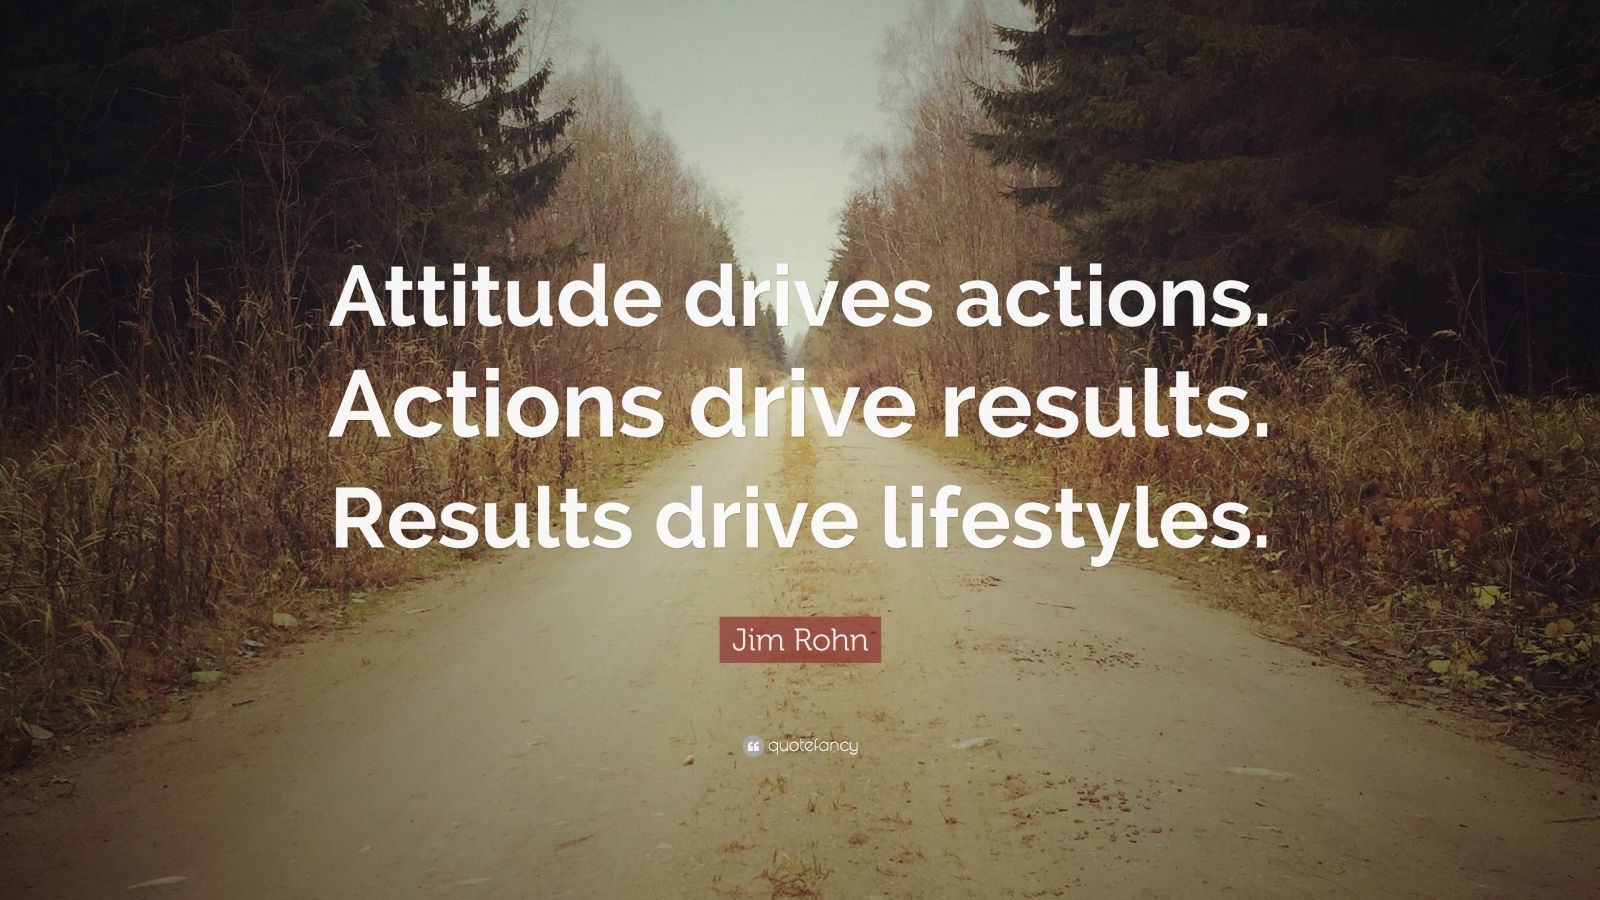 Jim Rohn Quote: “Attitude drives actions. Actions drive results